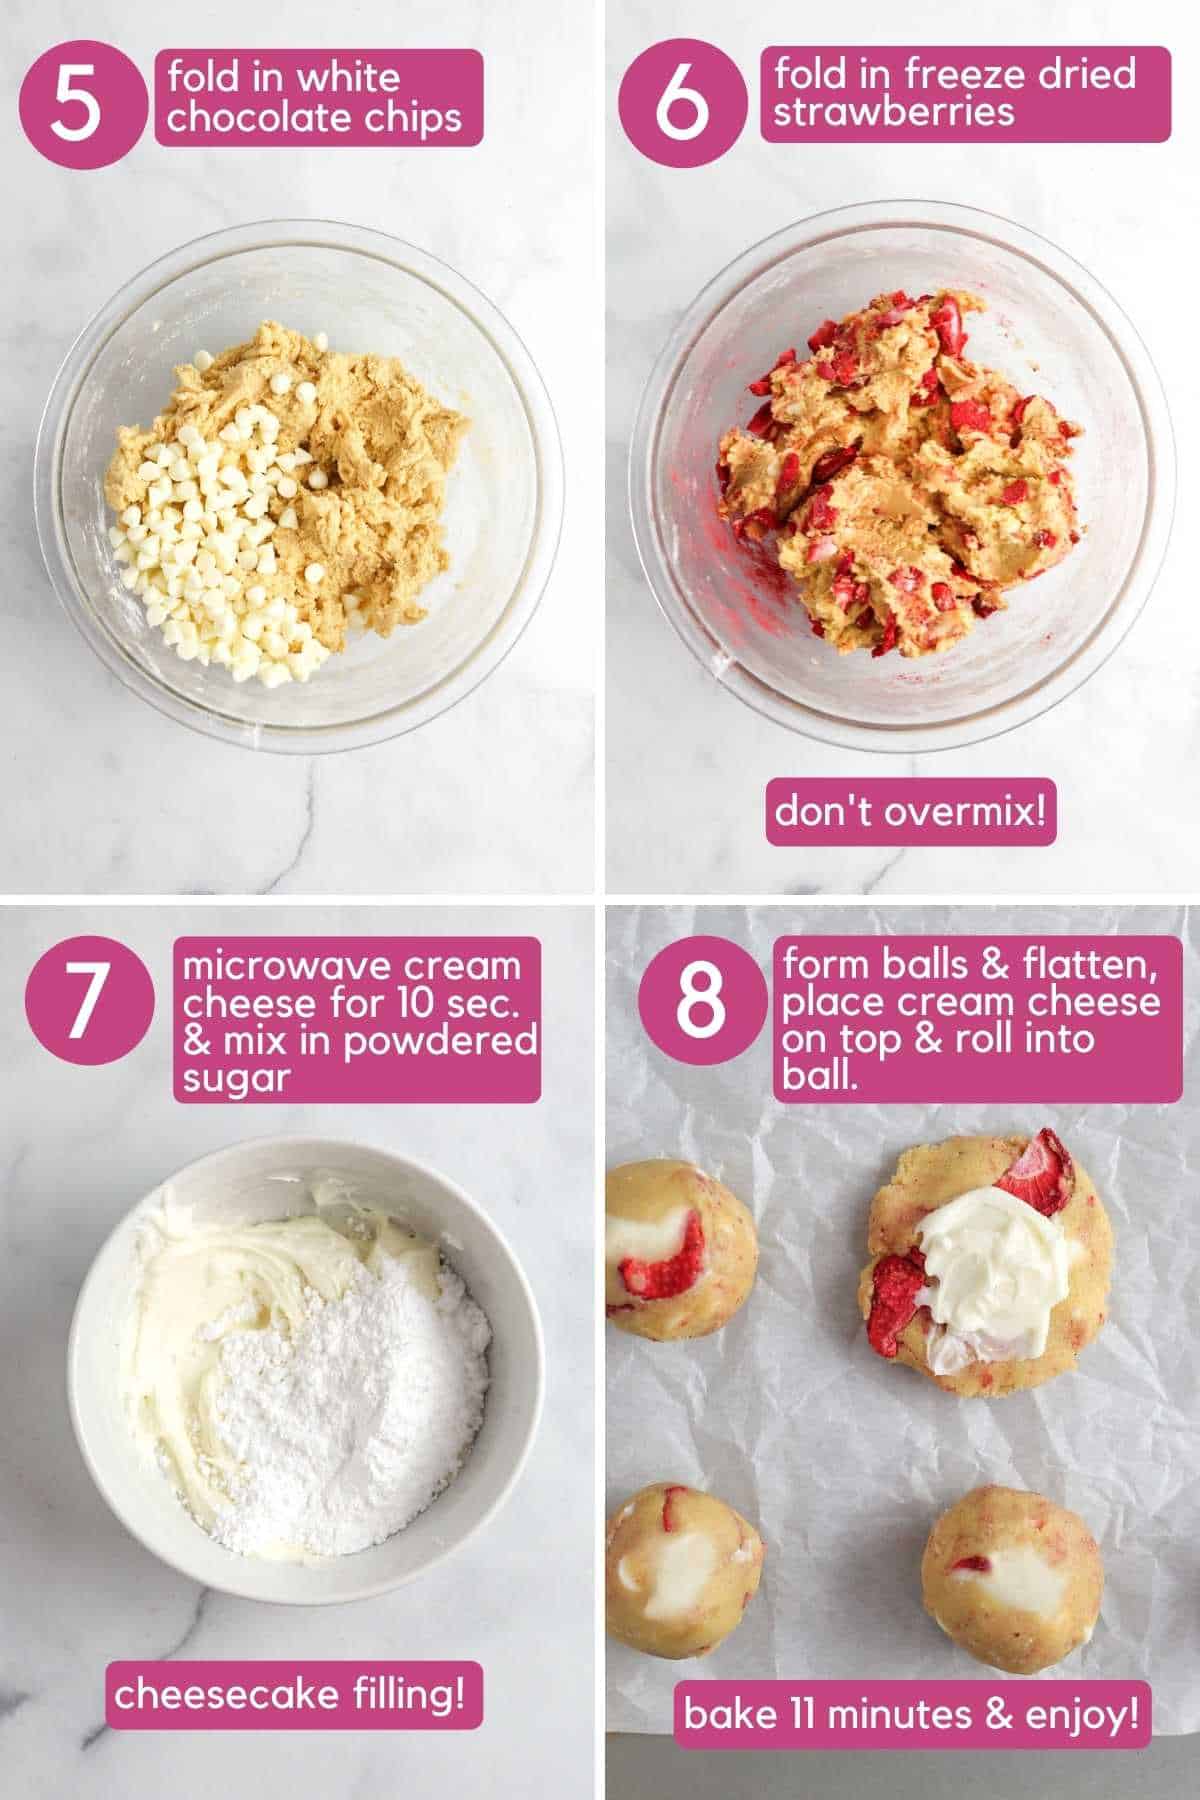 Adding strawberries to cookie dough and making a cheesecake filling.